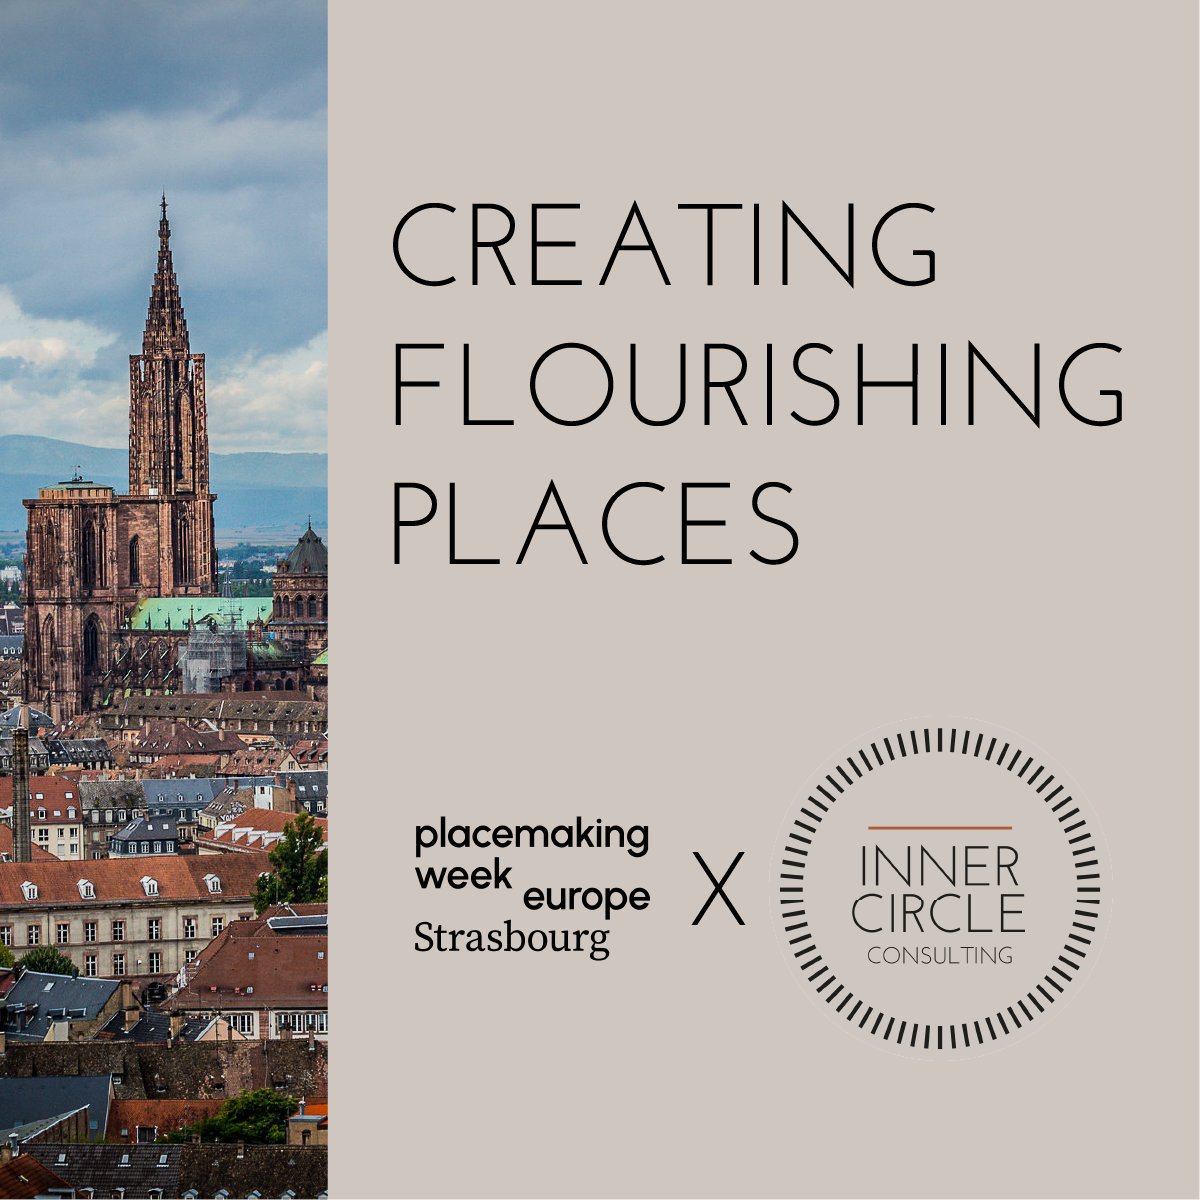 We believe that regenerating places is key to achieving our mission of unlocking a better future for all. We're delighted to participate in this year's #PlacemakingEurope , where our team will lead conversations around place-led development and placemaking for civic engagement.